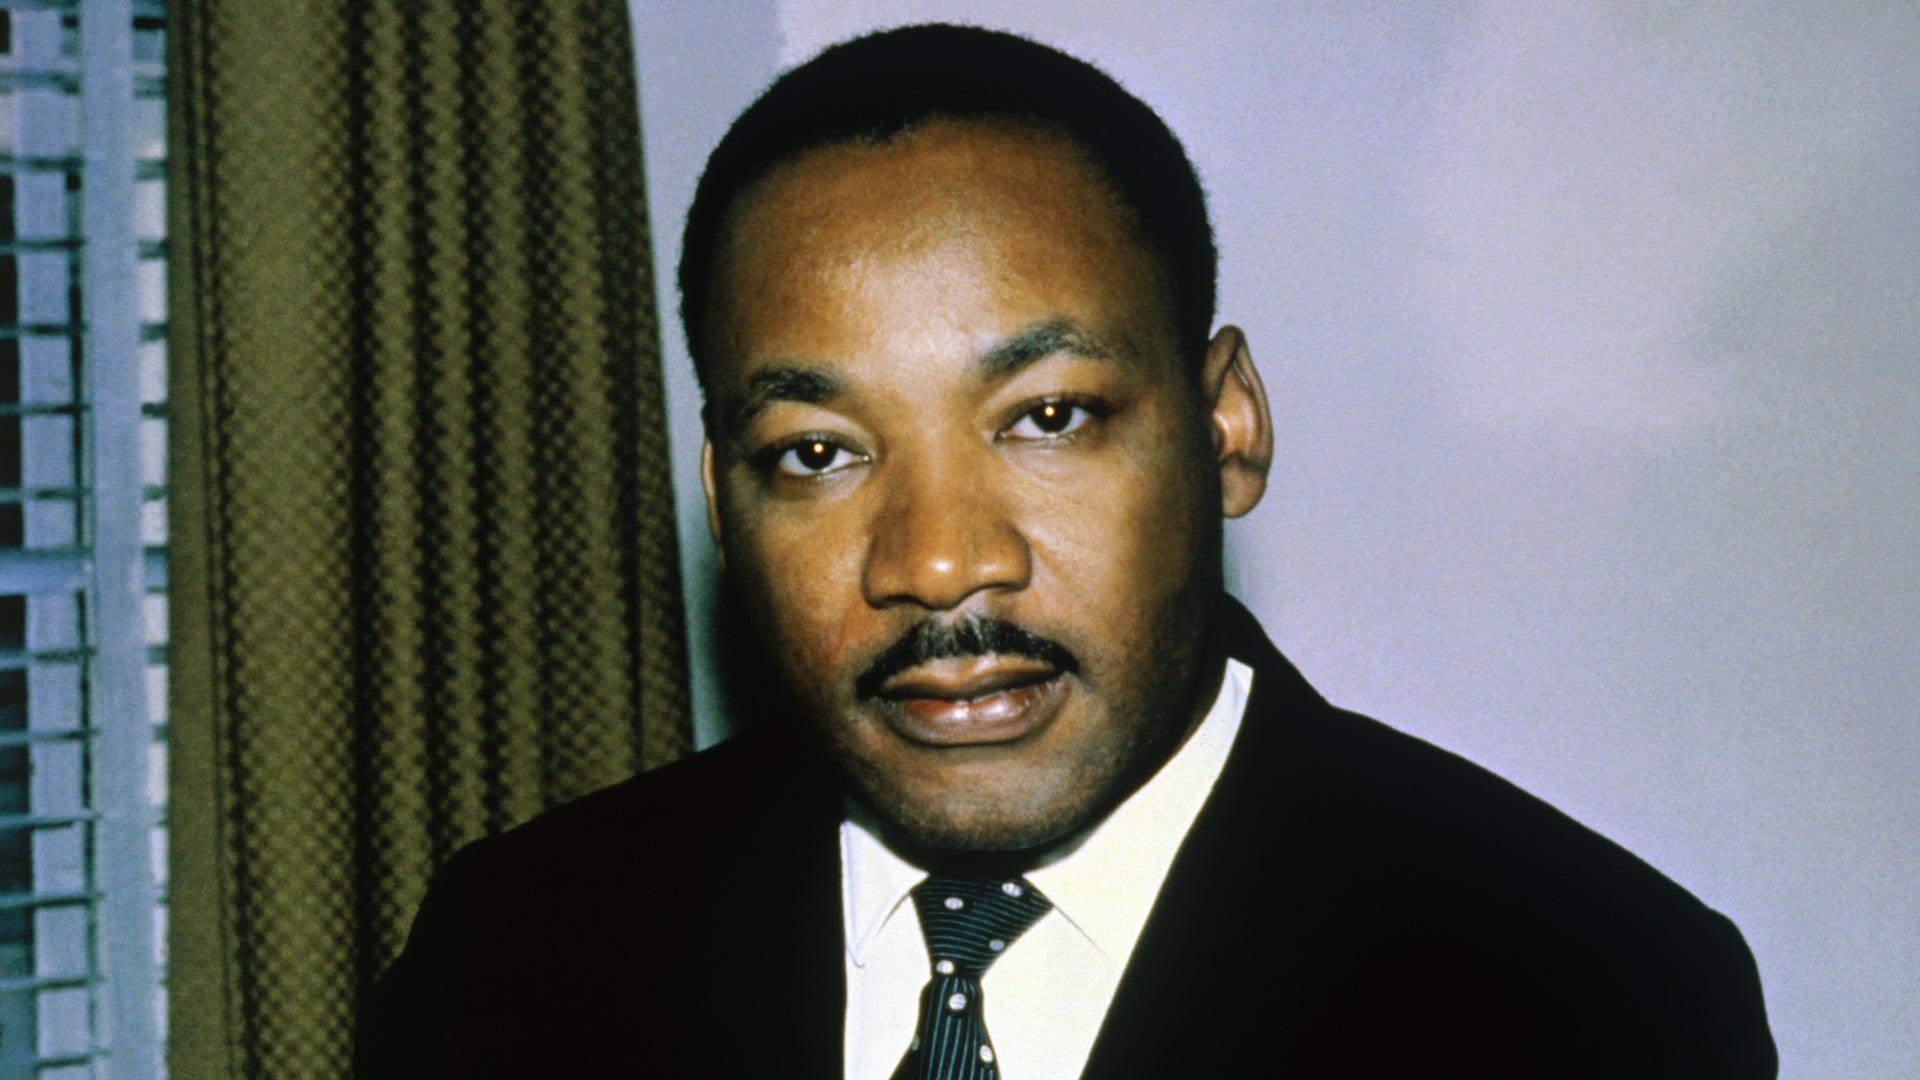 What Are 10 Interesting Facts About Martin Luther King Jr?